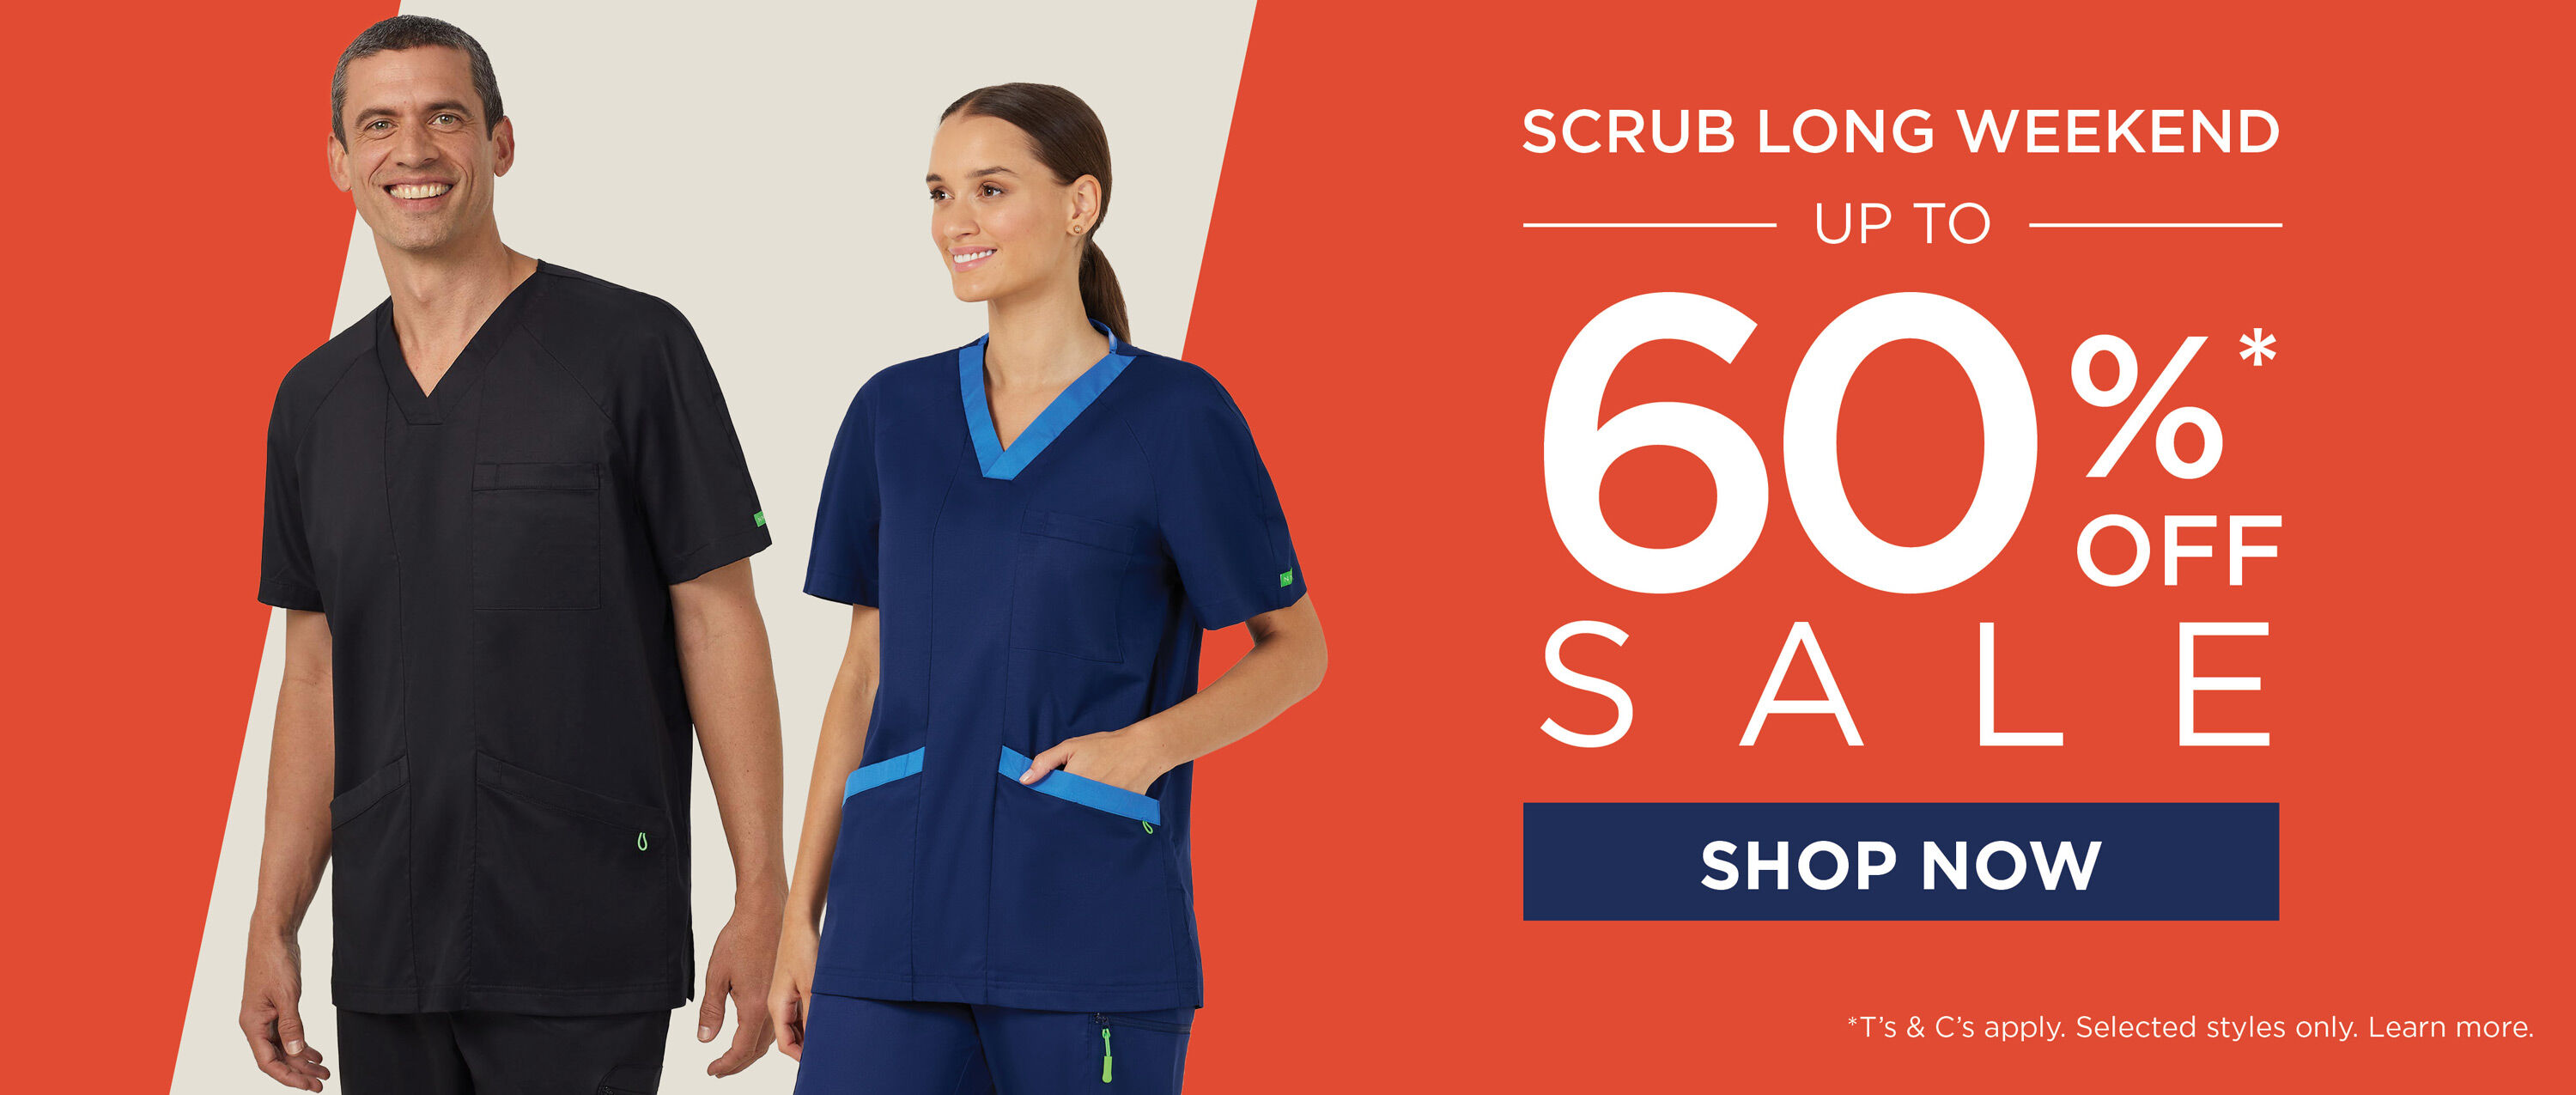 Long Weekend Scrub Sale up to 60% off*